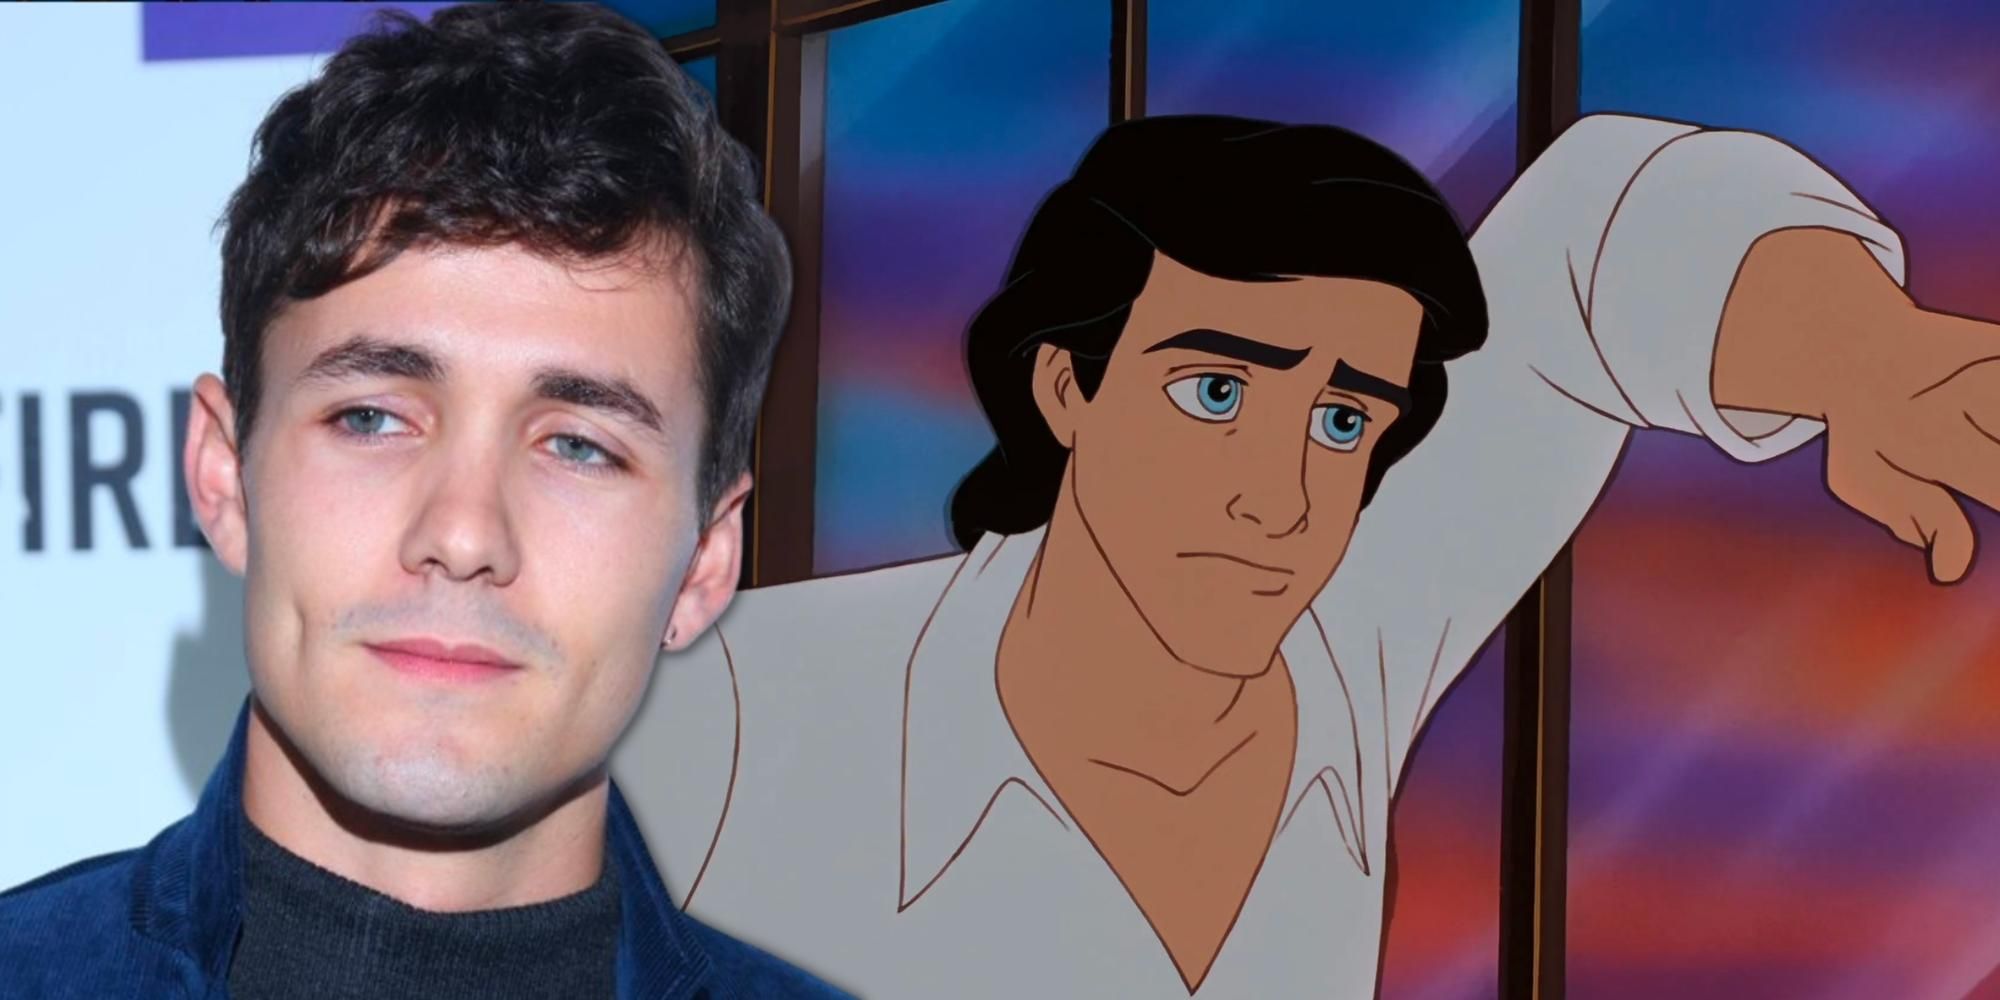 Jonah Hauer-King in front of a still of Prince Eric from the Disney animated film the Little Mermaid